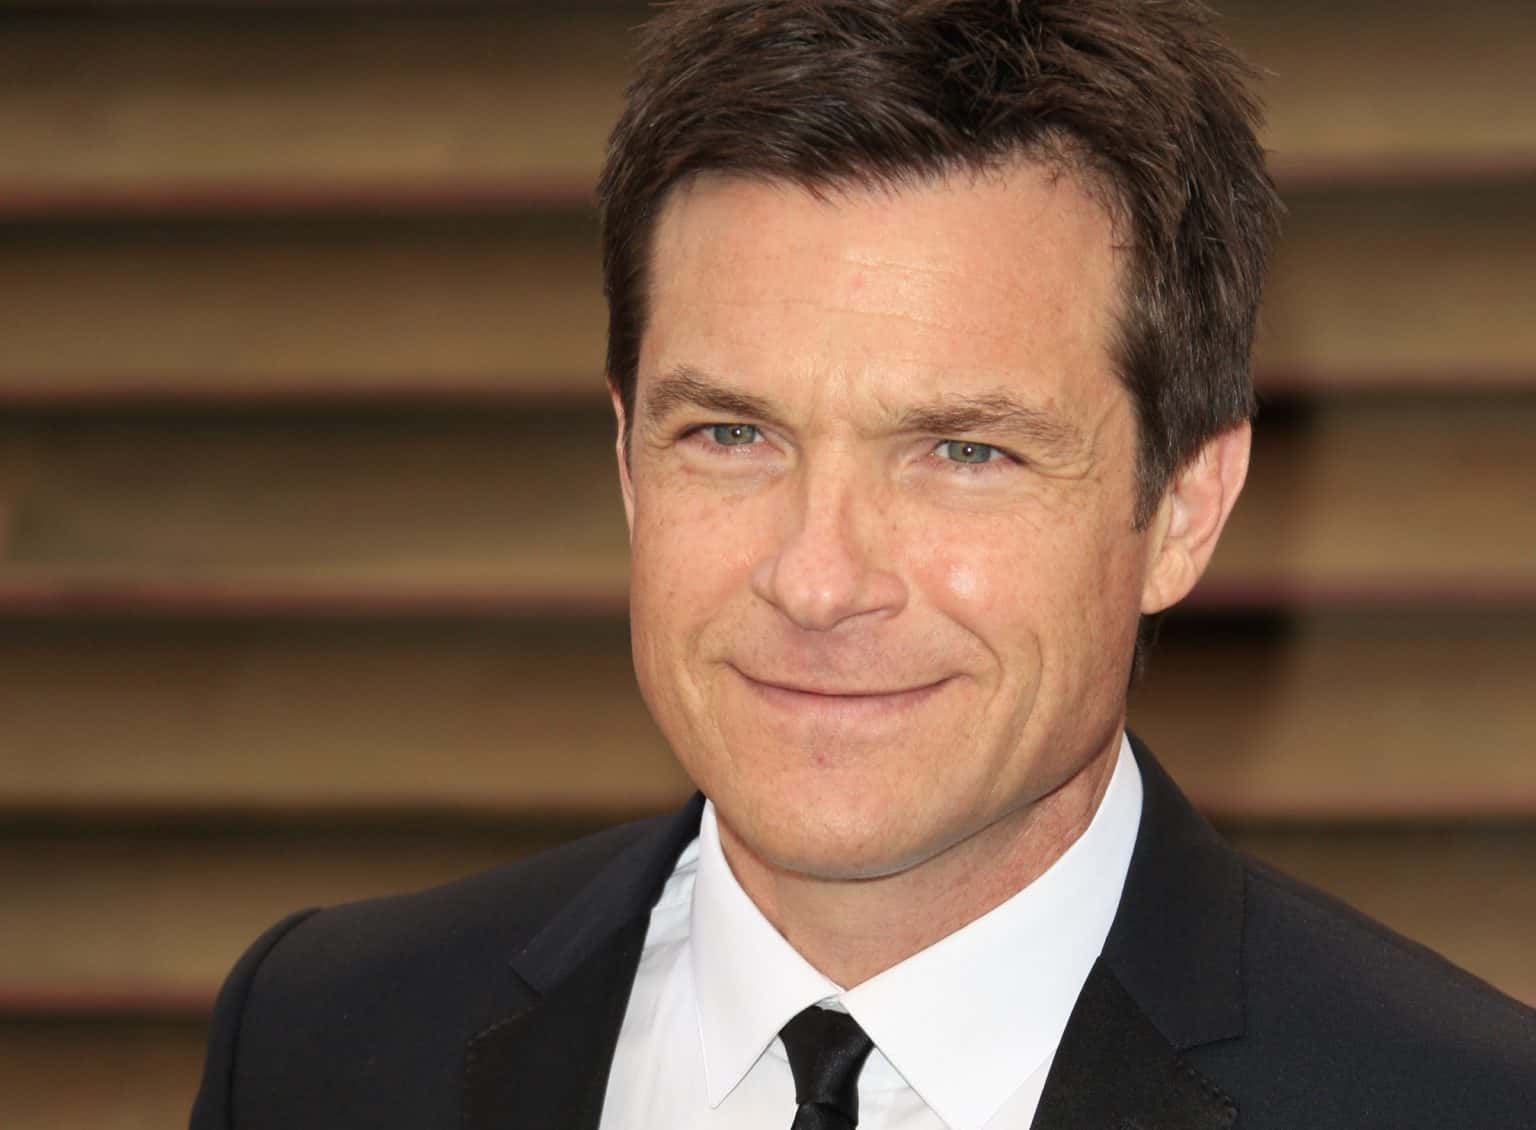 Developed Facts About Jason Bateman, Hollywood's Straight Man